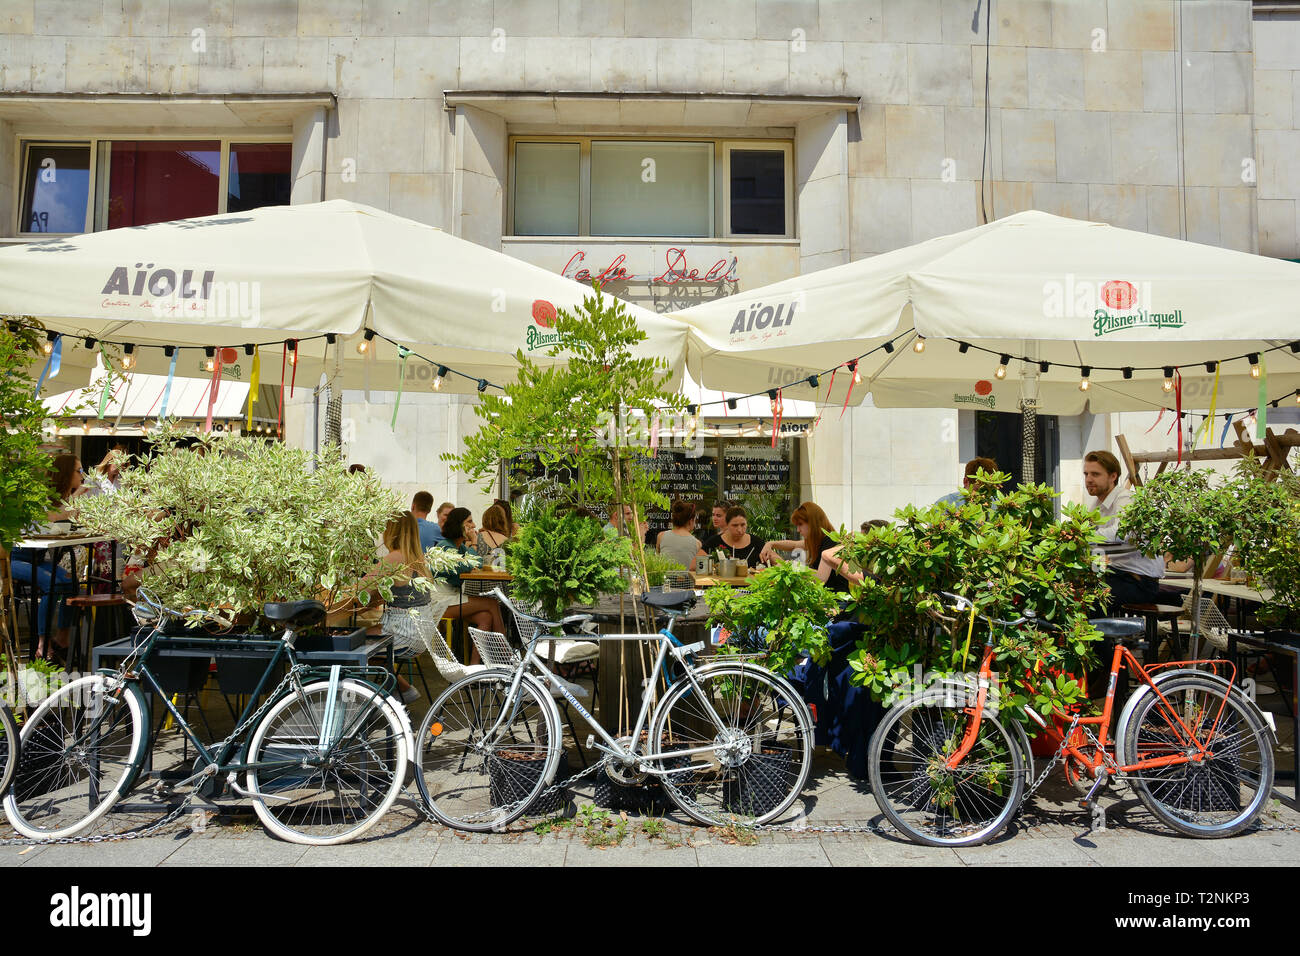 WARSAW, POLAND - JUNE 29, 2018. City view with Cafe Deli garden in Warsaw , Poland. Stock Photo